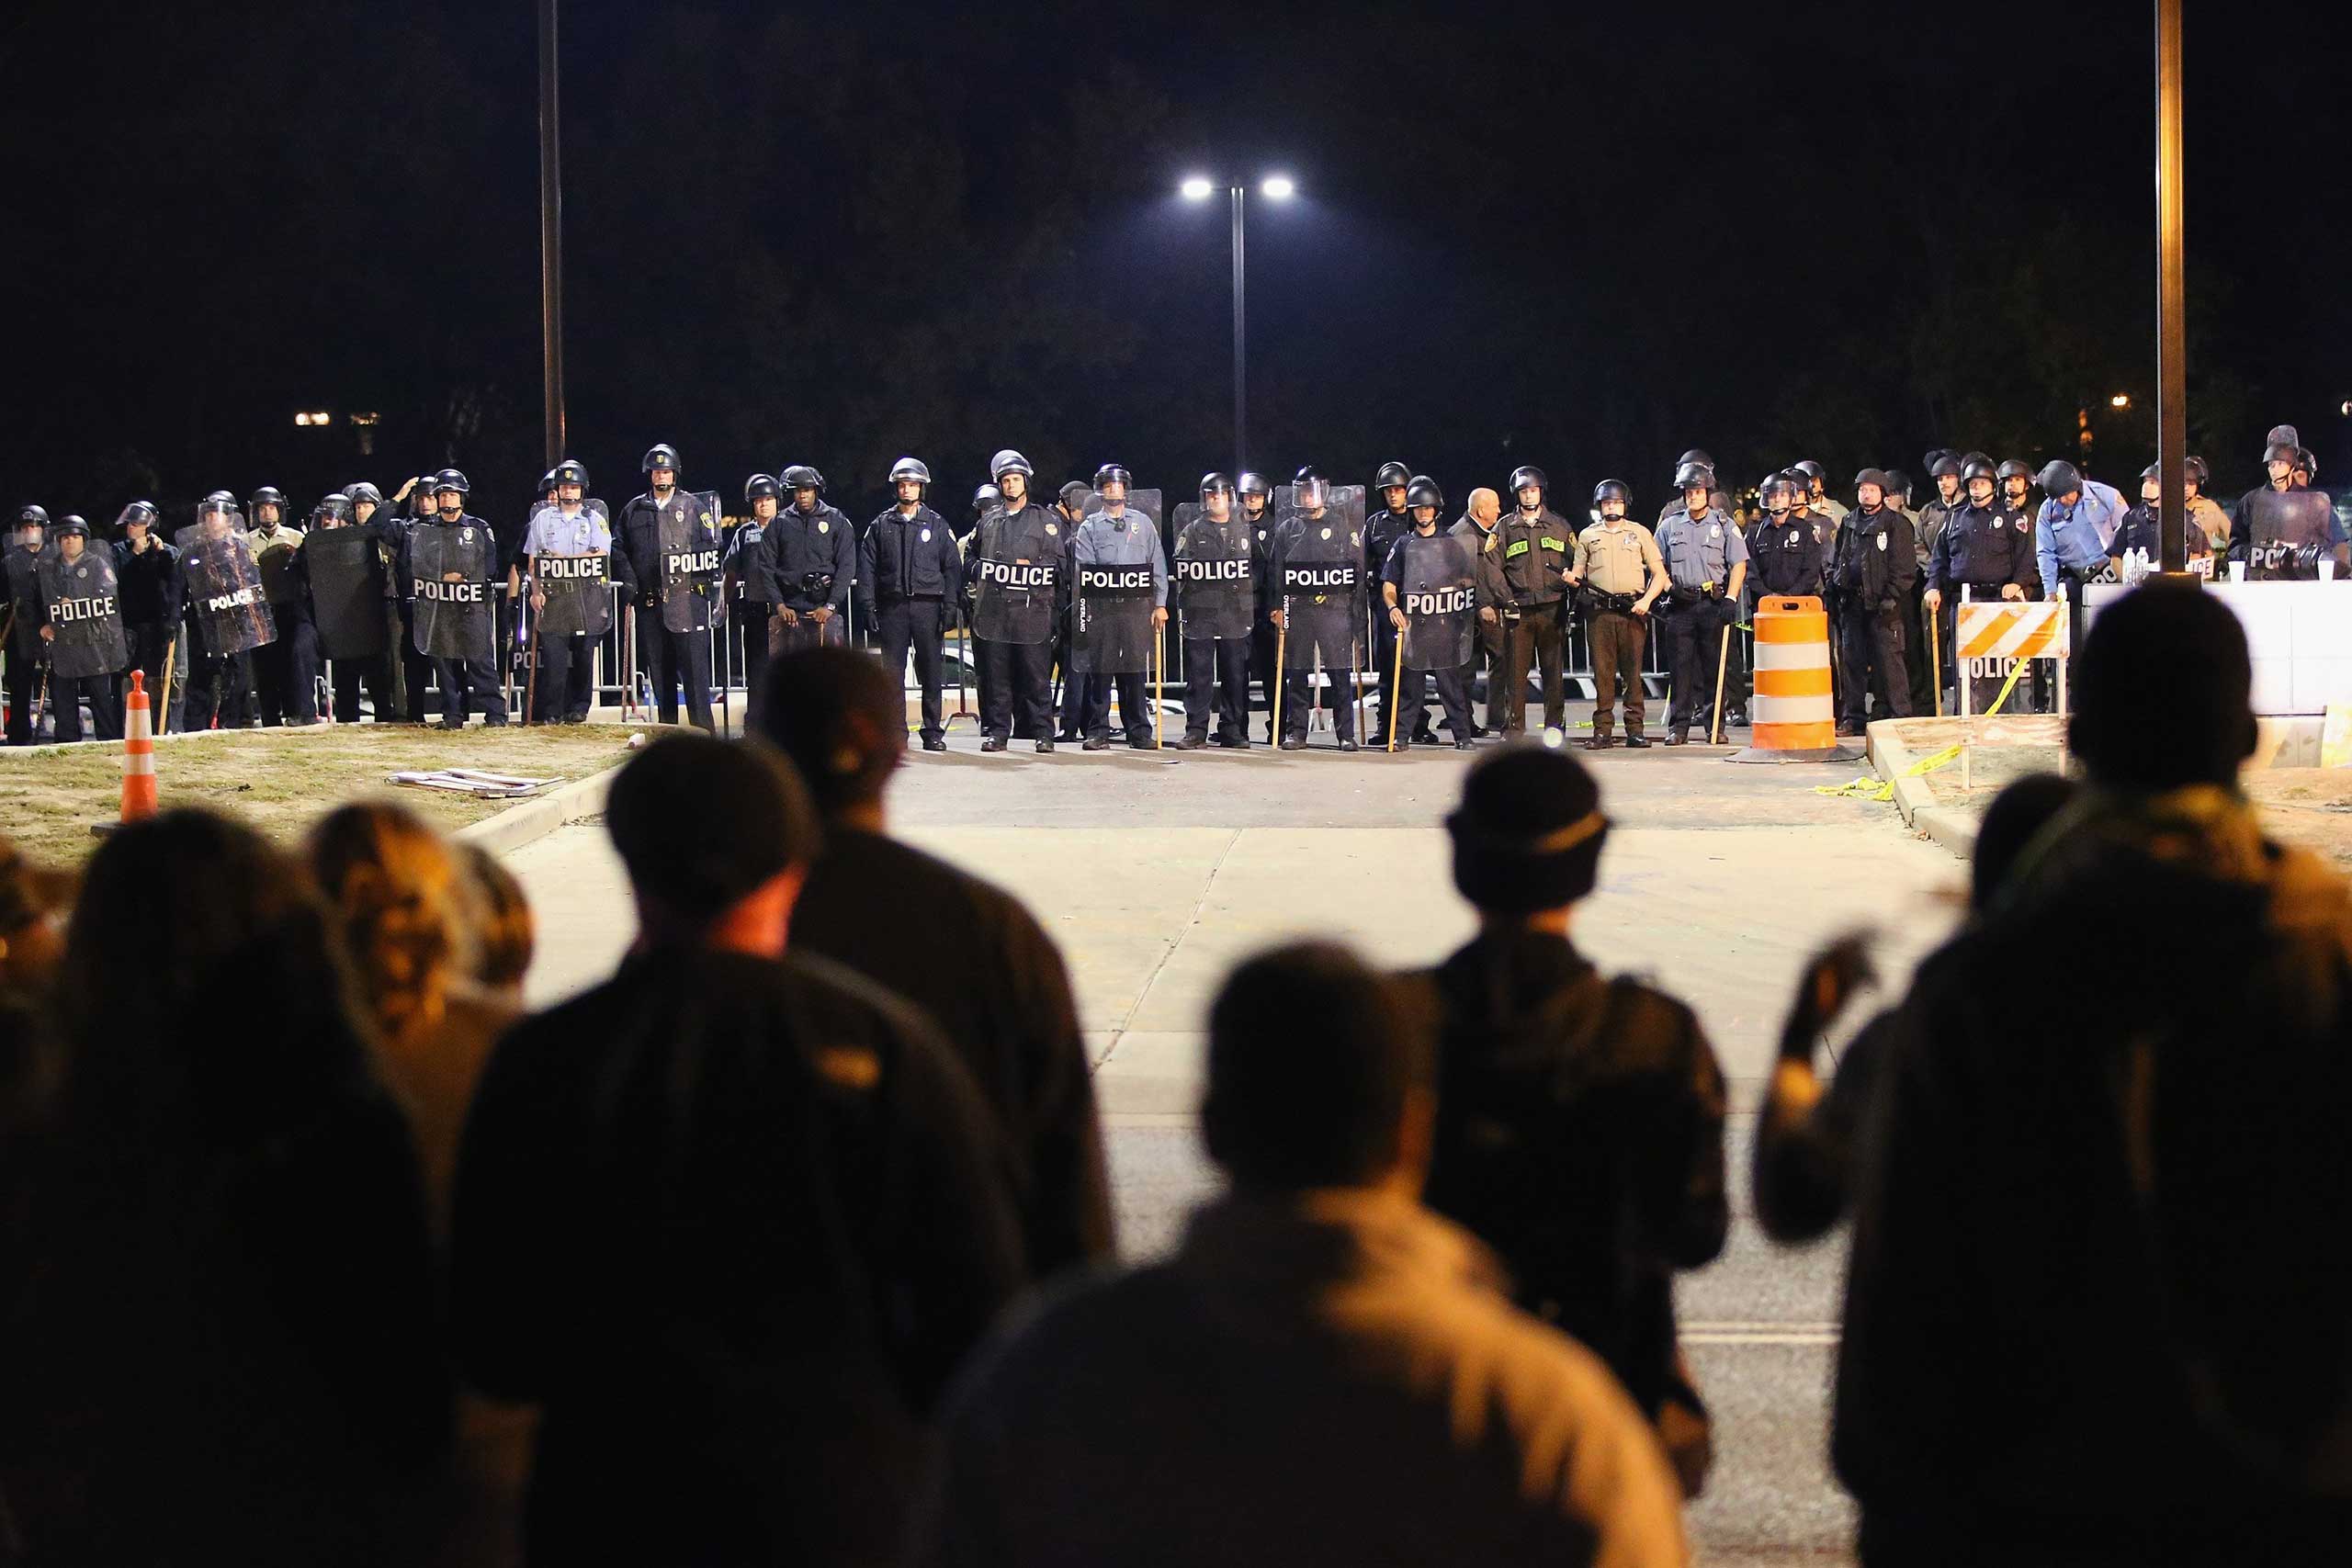 Police face off with demonstrators outside the police station as protests continue in the wake of 18-year-old Michael Brown's death on Oct. 22, 2014 in Ferguson, Missouri. (Scott Olson—Getty Images)